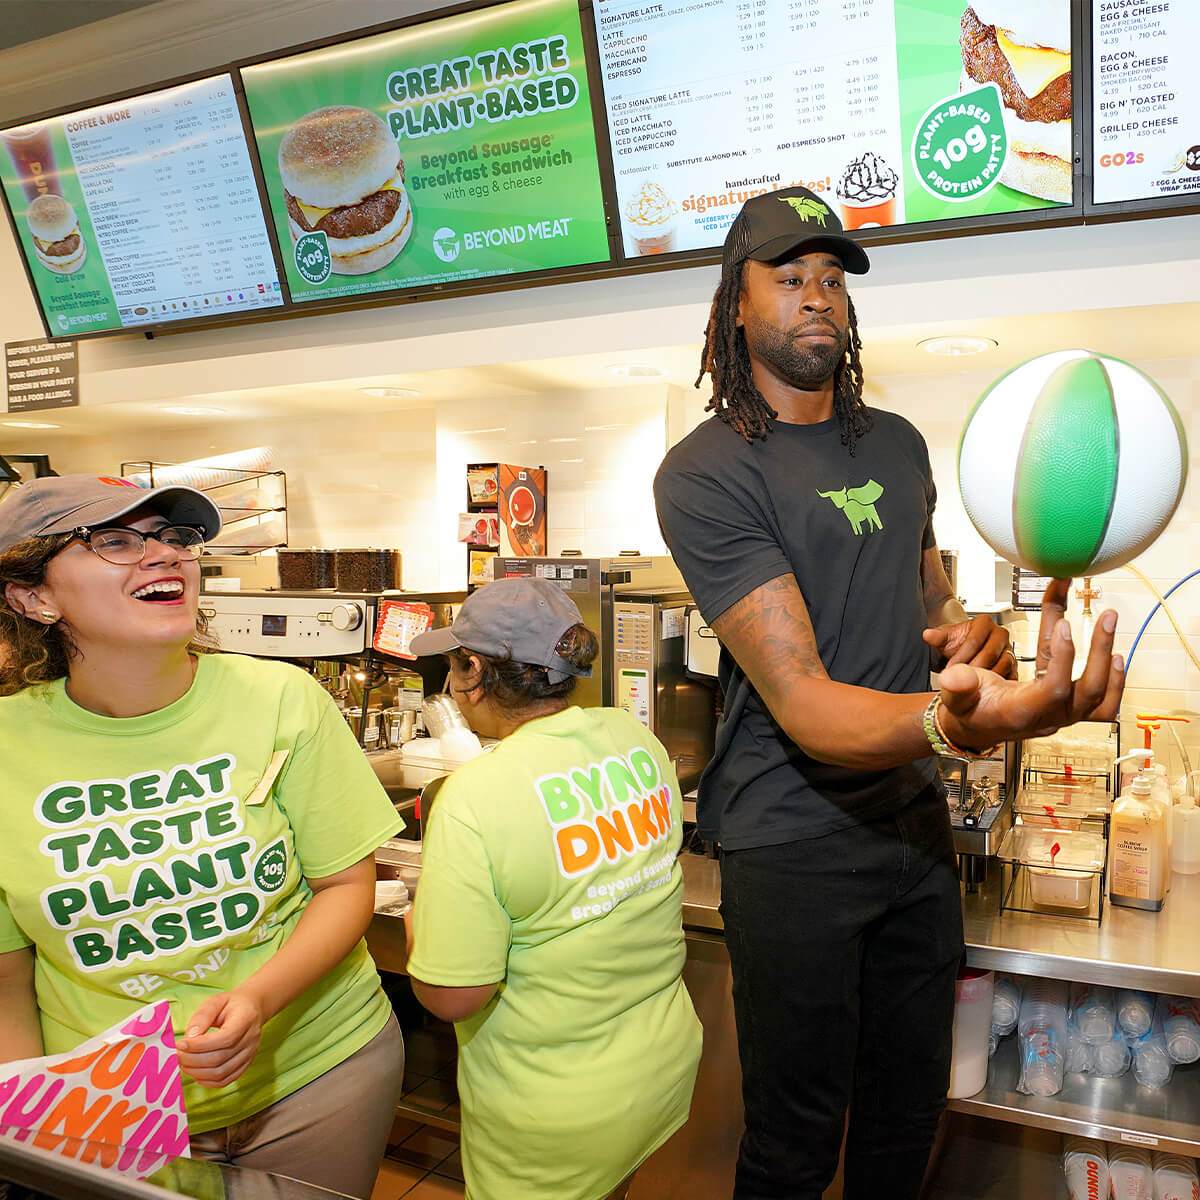 Dunkin' and Beyond Meat collaboration featuring the Great Taste Plant-Based Beyond Sausage Breakfast Sandwich